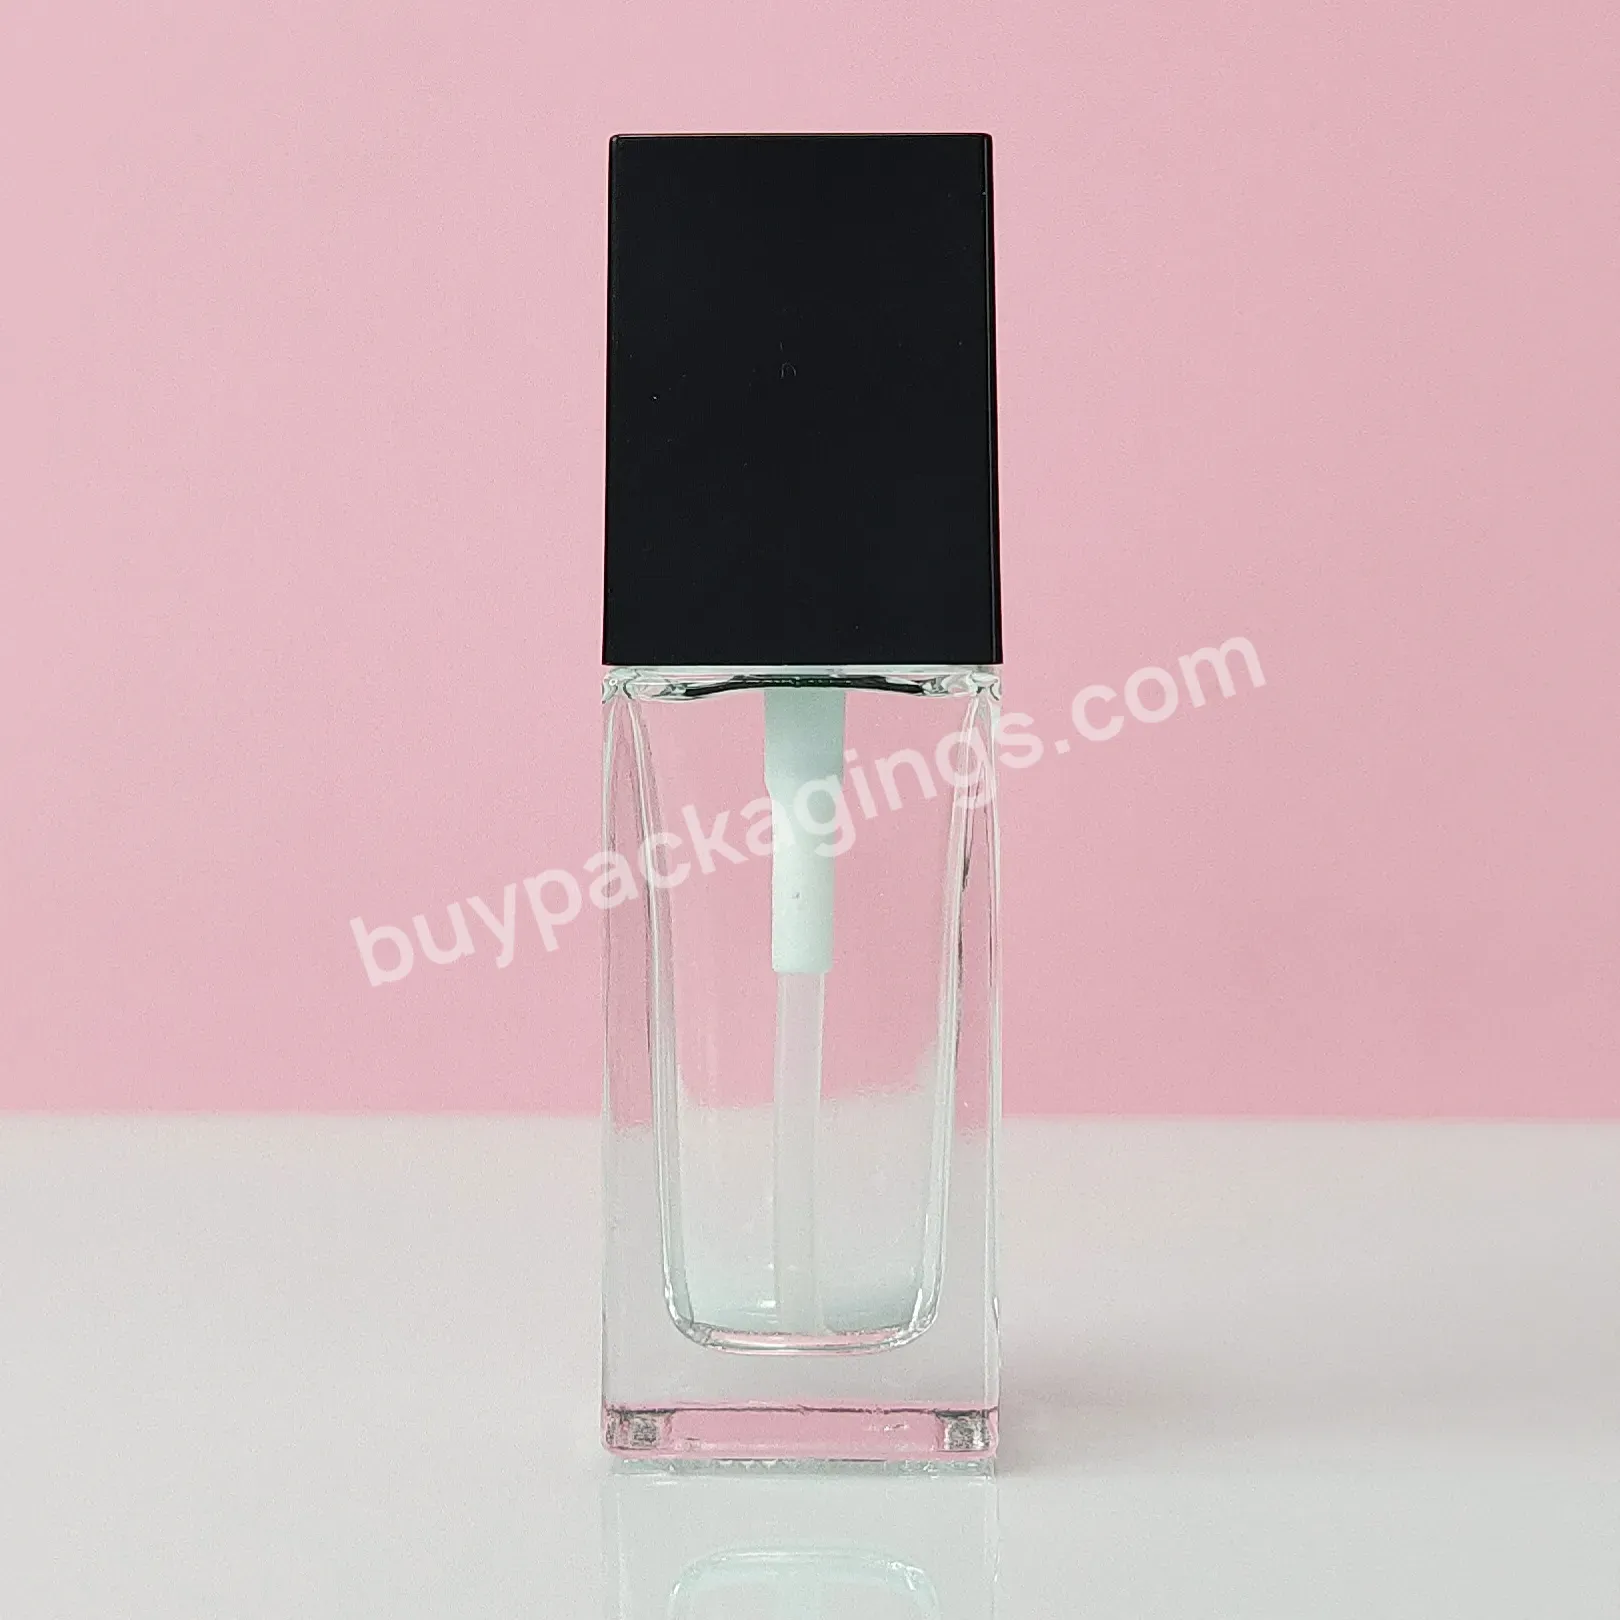 New Design Luxury Cosmetic Liquid Foundation Lotion Cream Glass Container 30ml 1oz Refillable Bottle With Pump - Buy Rectangular Glass Perfume Bottle,Glass Cosmetic Packaging Rectangular,Liquid Foundation Packaging.